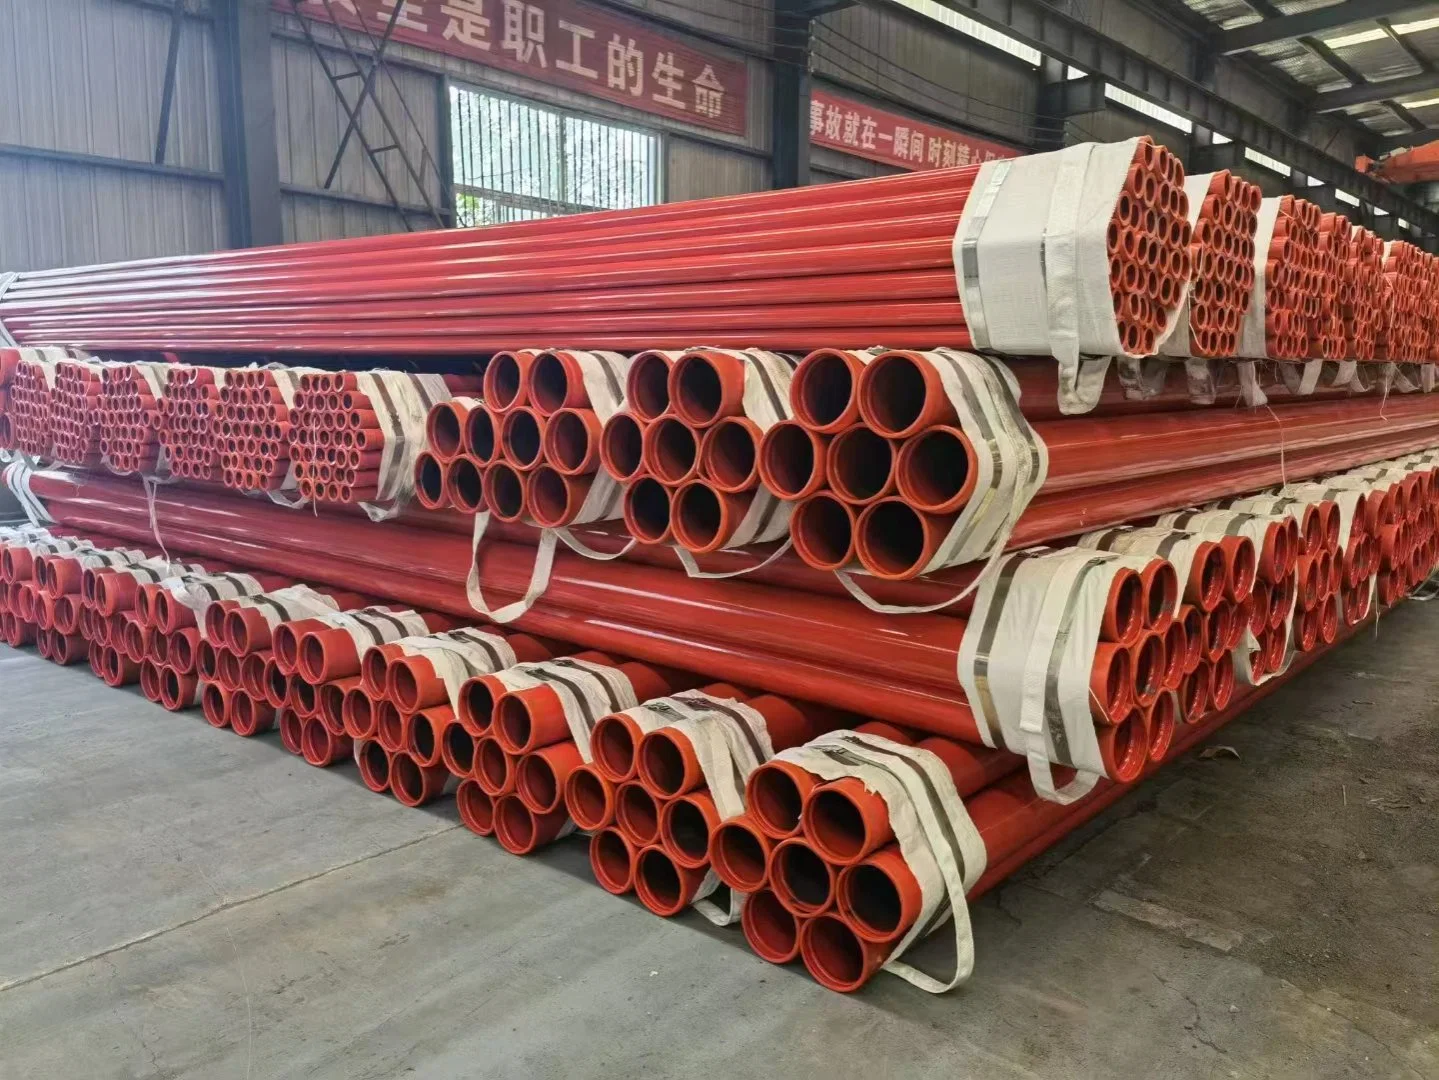 Hot Sale Outside PE Inside Blue Plastic Coated Composite Steel Pipe Pipe for Corrosion Prevention Pipe for Water Supply